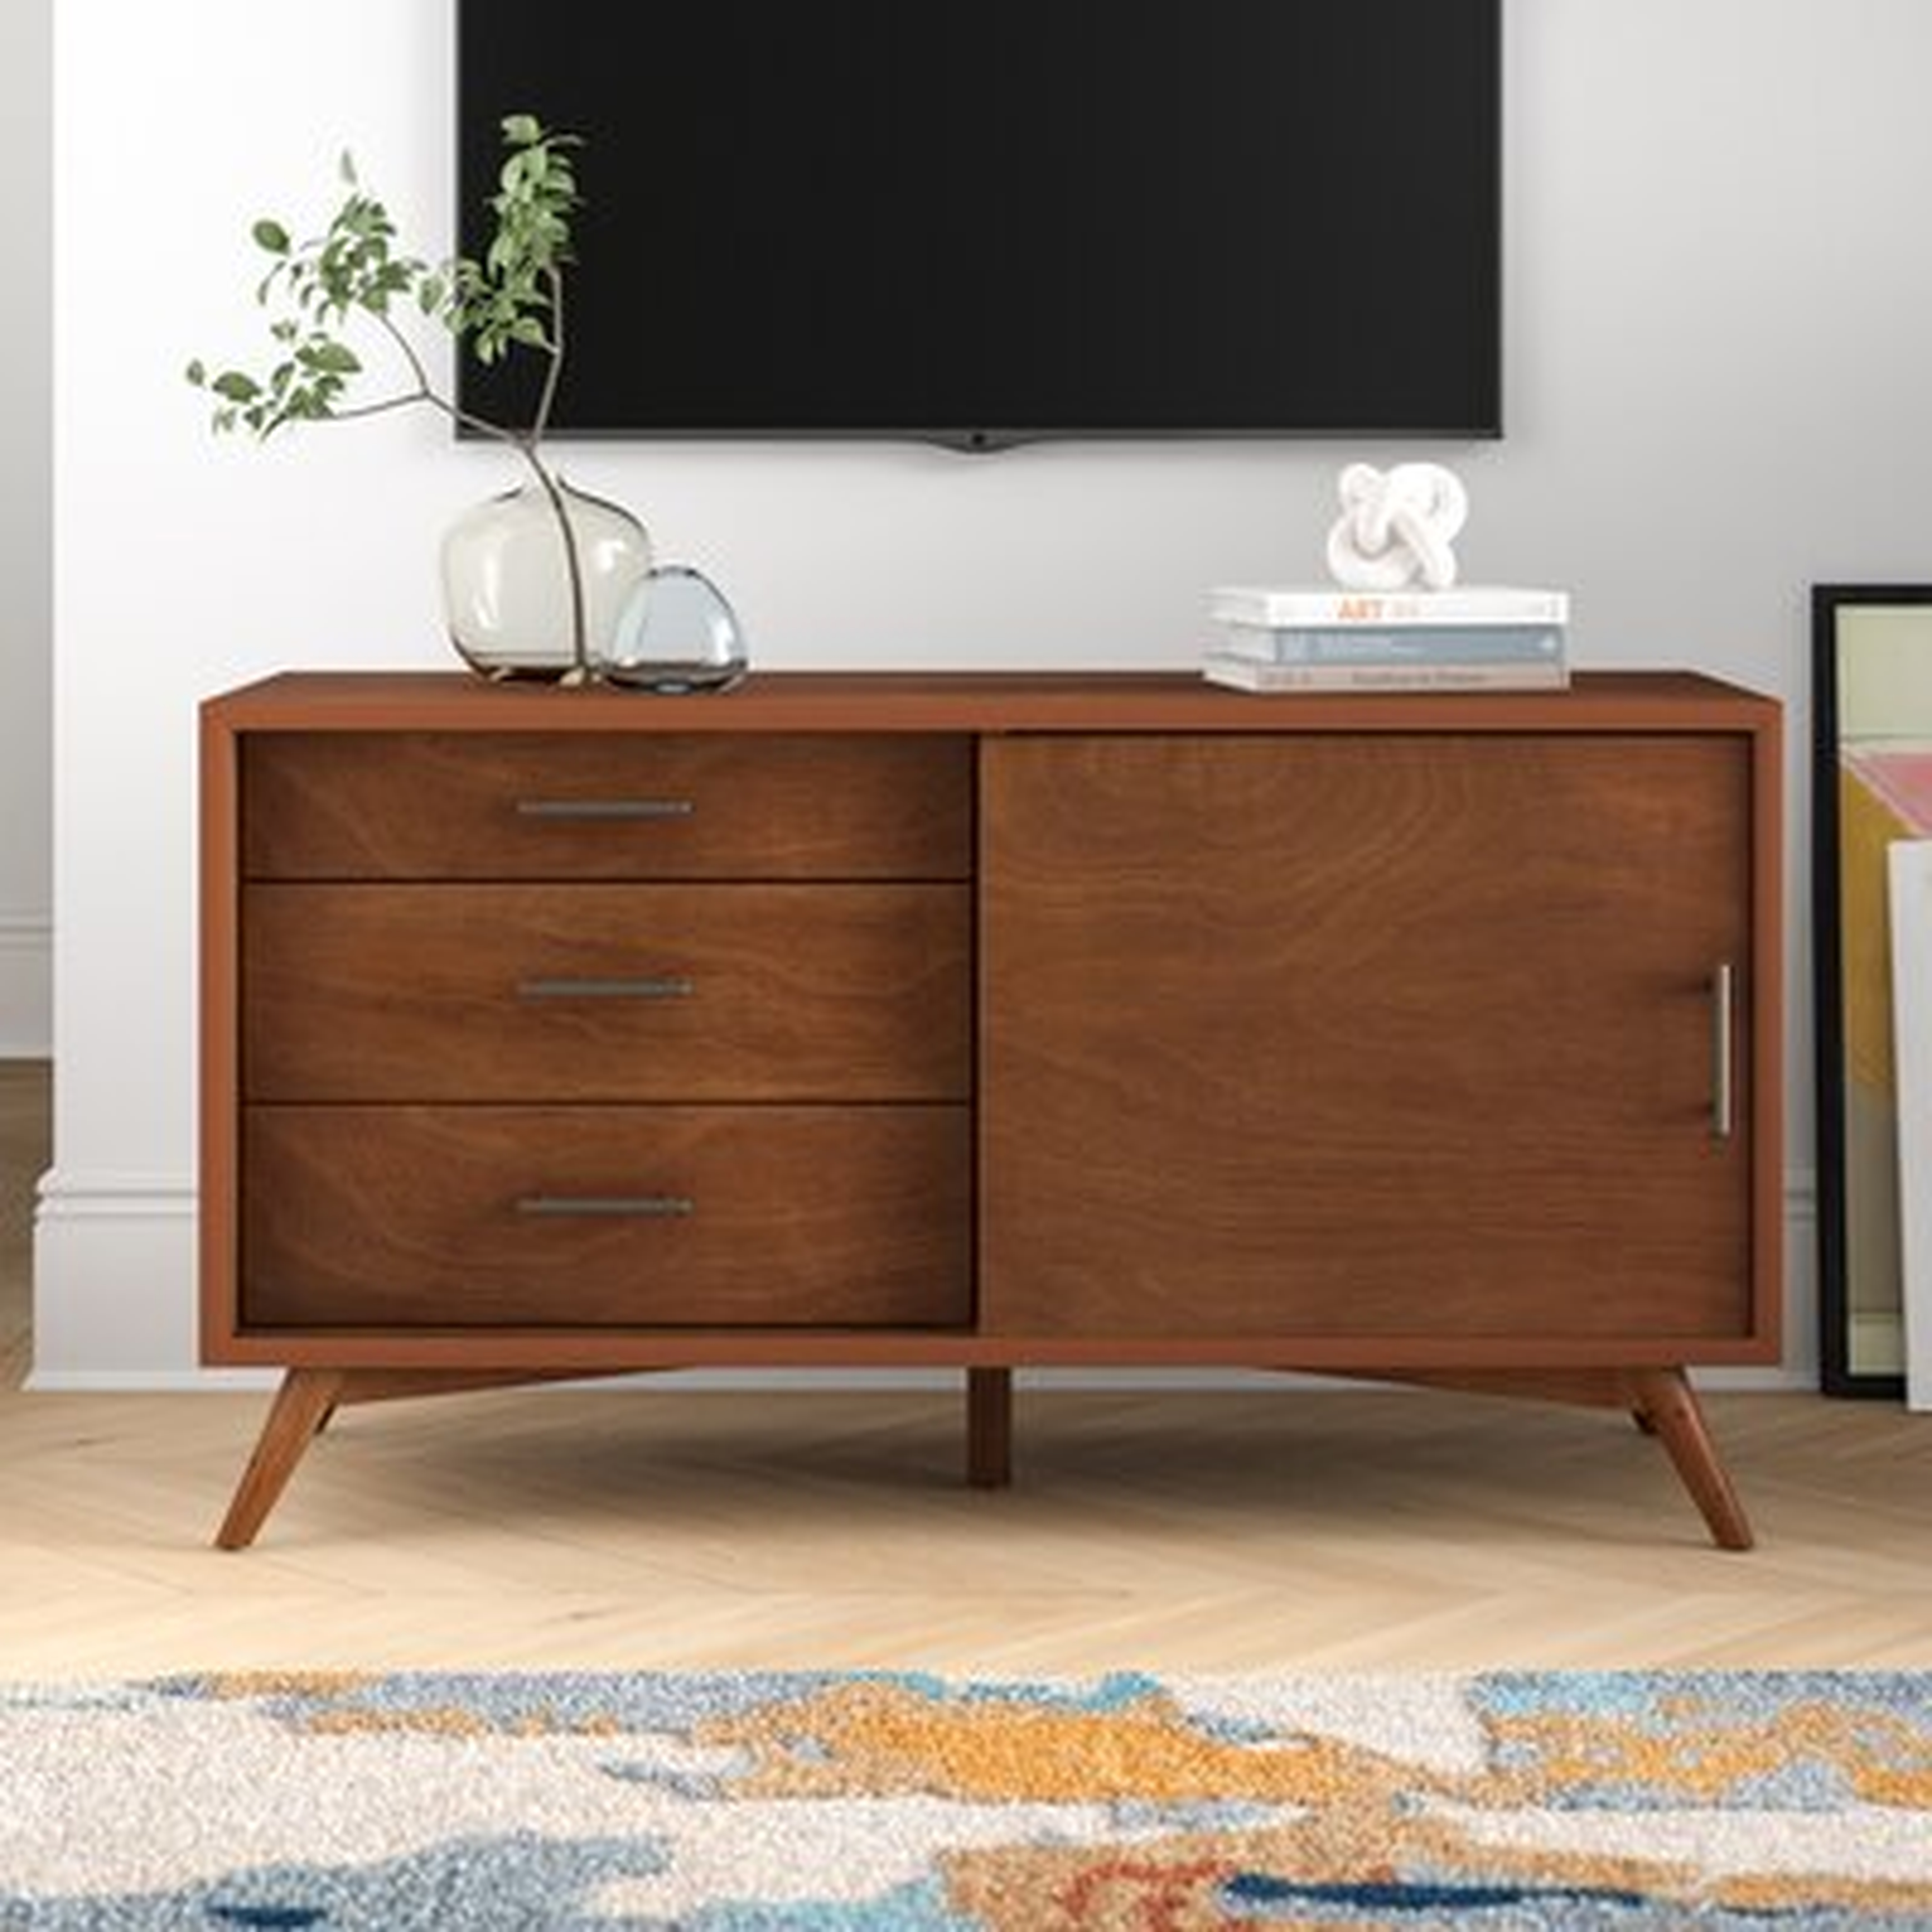 Parocela TV Stand for TVs up to 55 inches - Wayfair